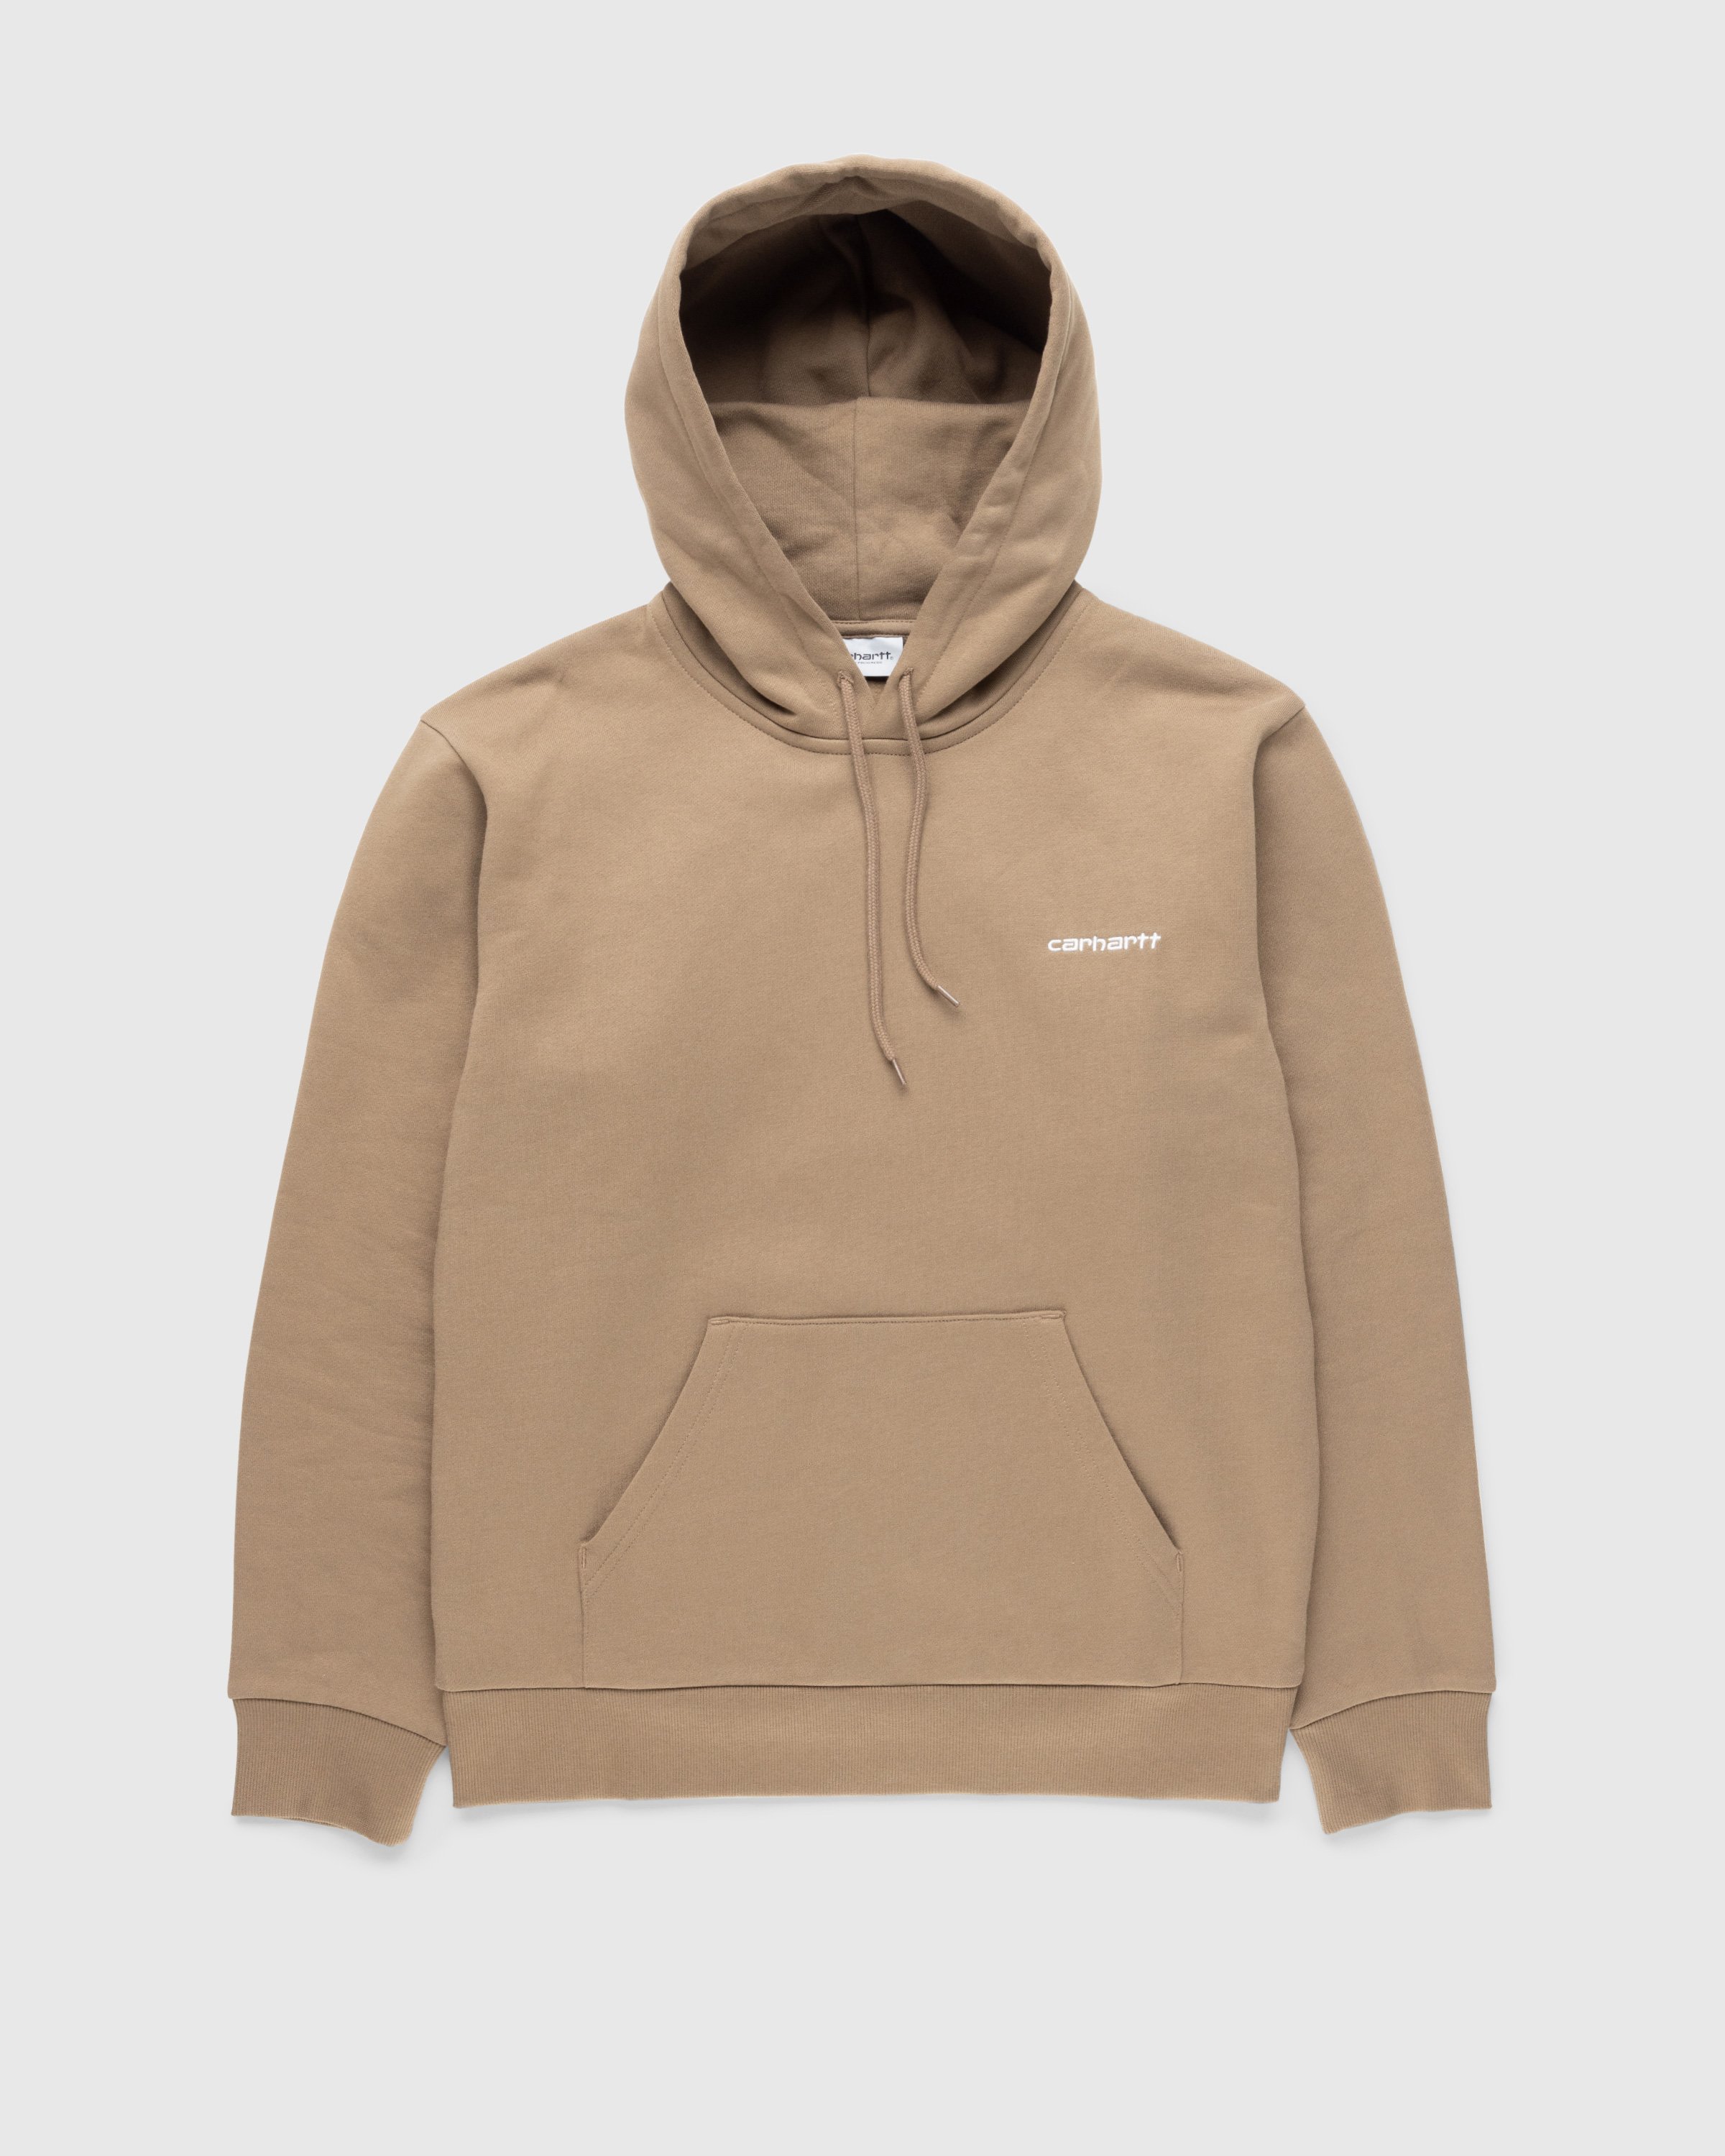 Carhartt WIP - Script Embroidery Hoodie Buffalo/White - Clothing - Green - Image 1